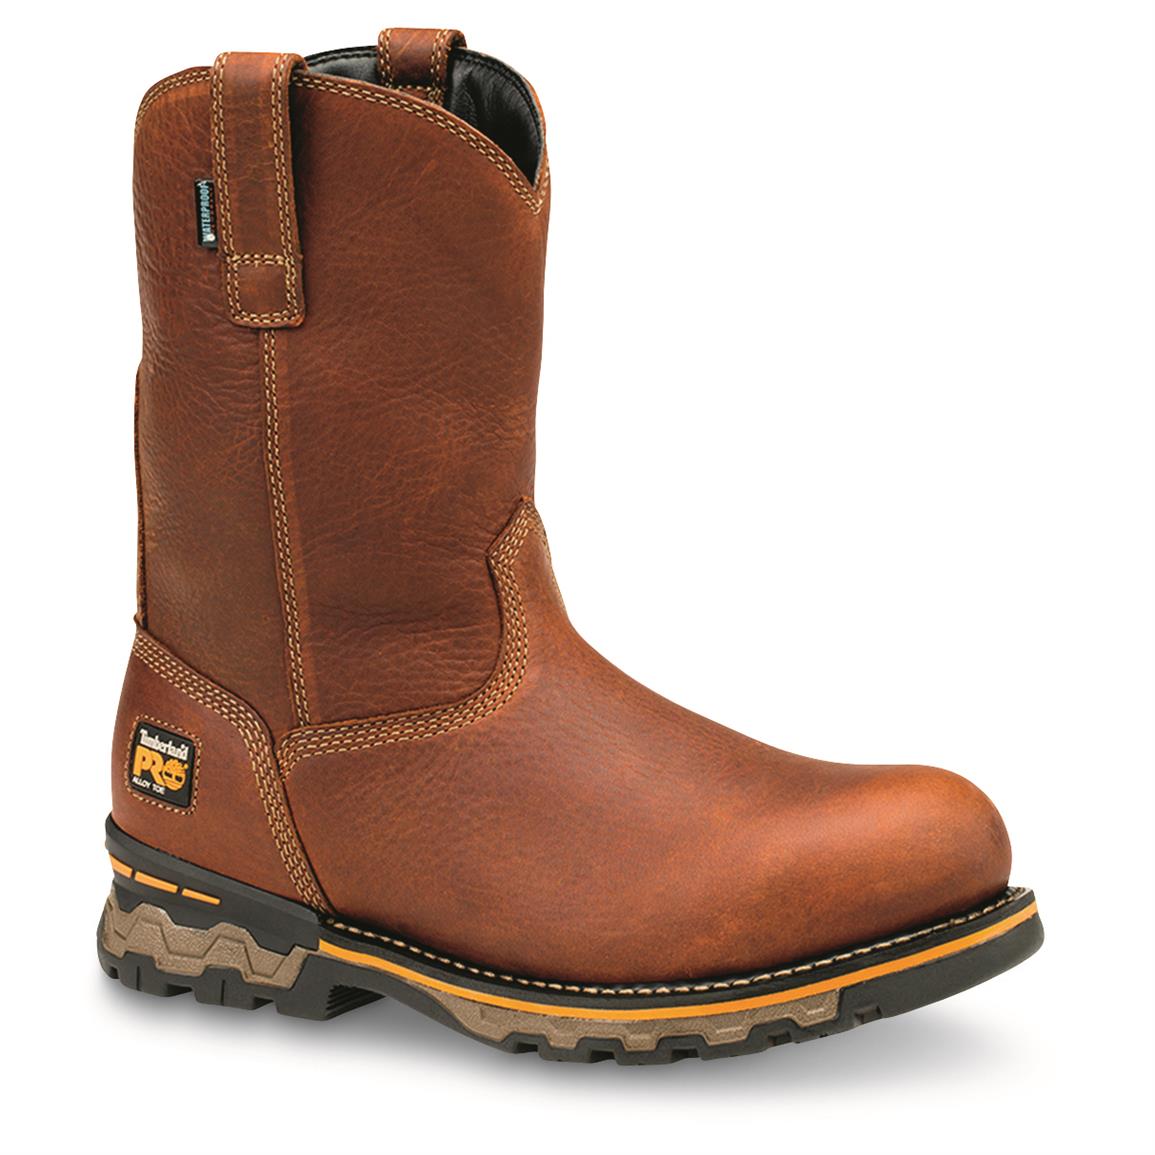 Timberland PRO Men's AG Boss Waterproof Alloy Toe PullOn Work Boots 680814, Work Boots at